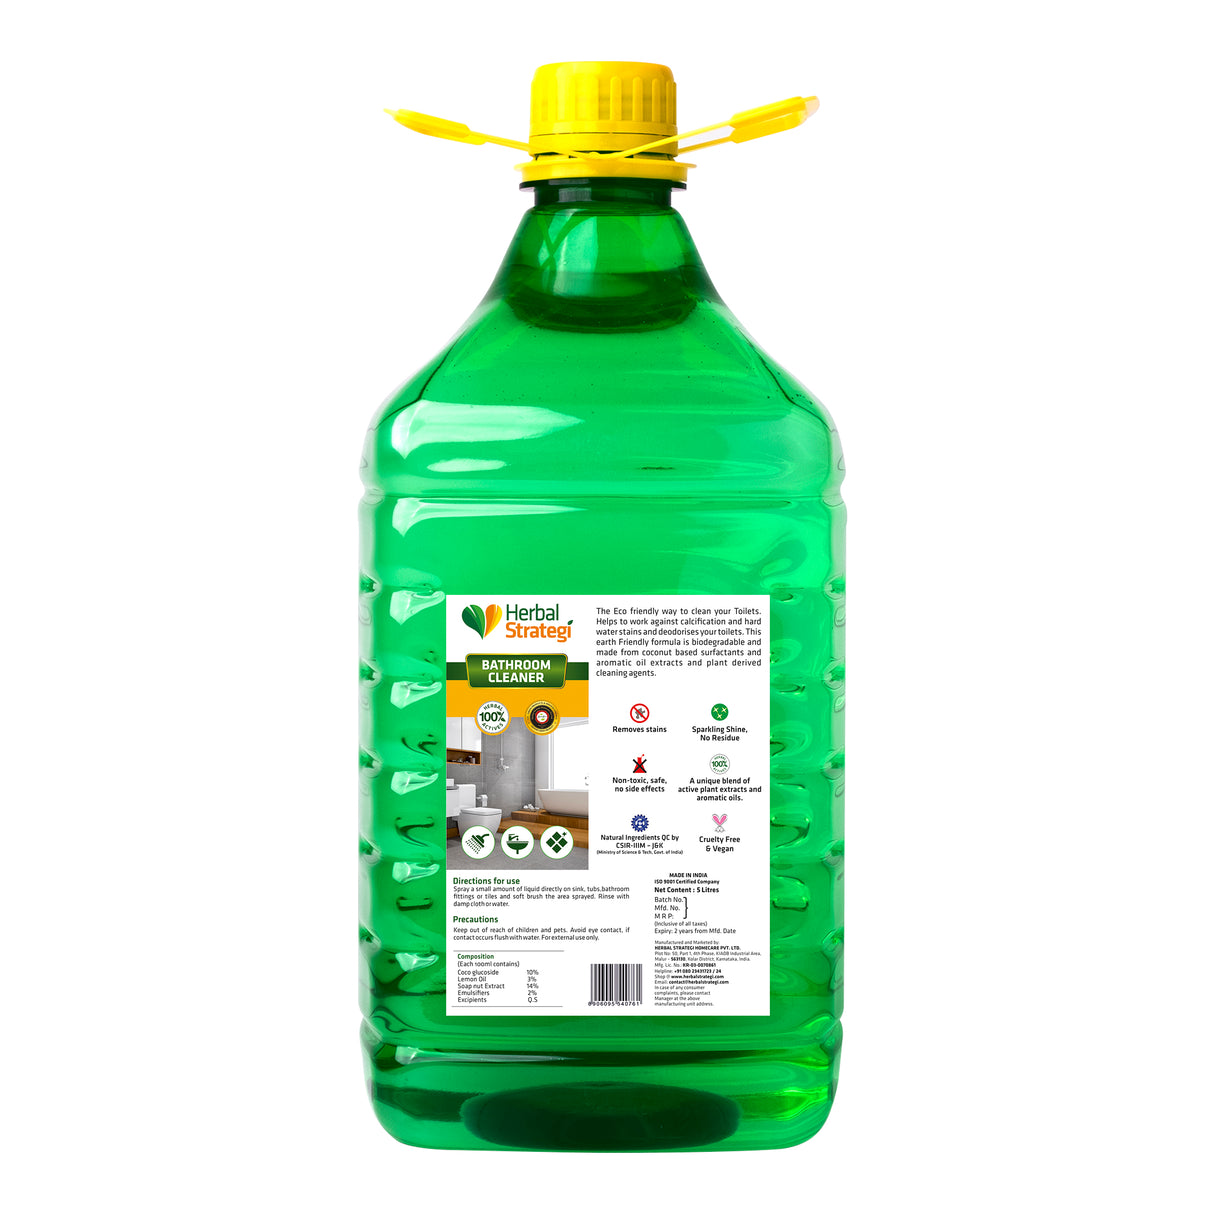 Herbal Bathroom Cleaner | Product Size: 500 ml, 2 ltrs, 5 ltrs